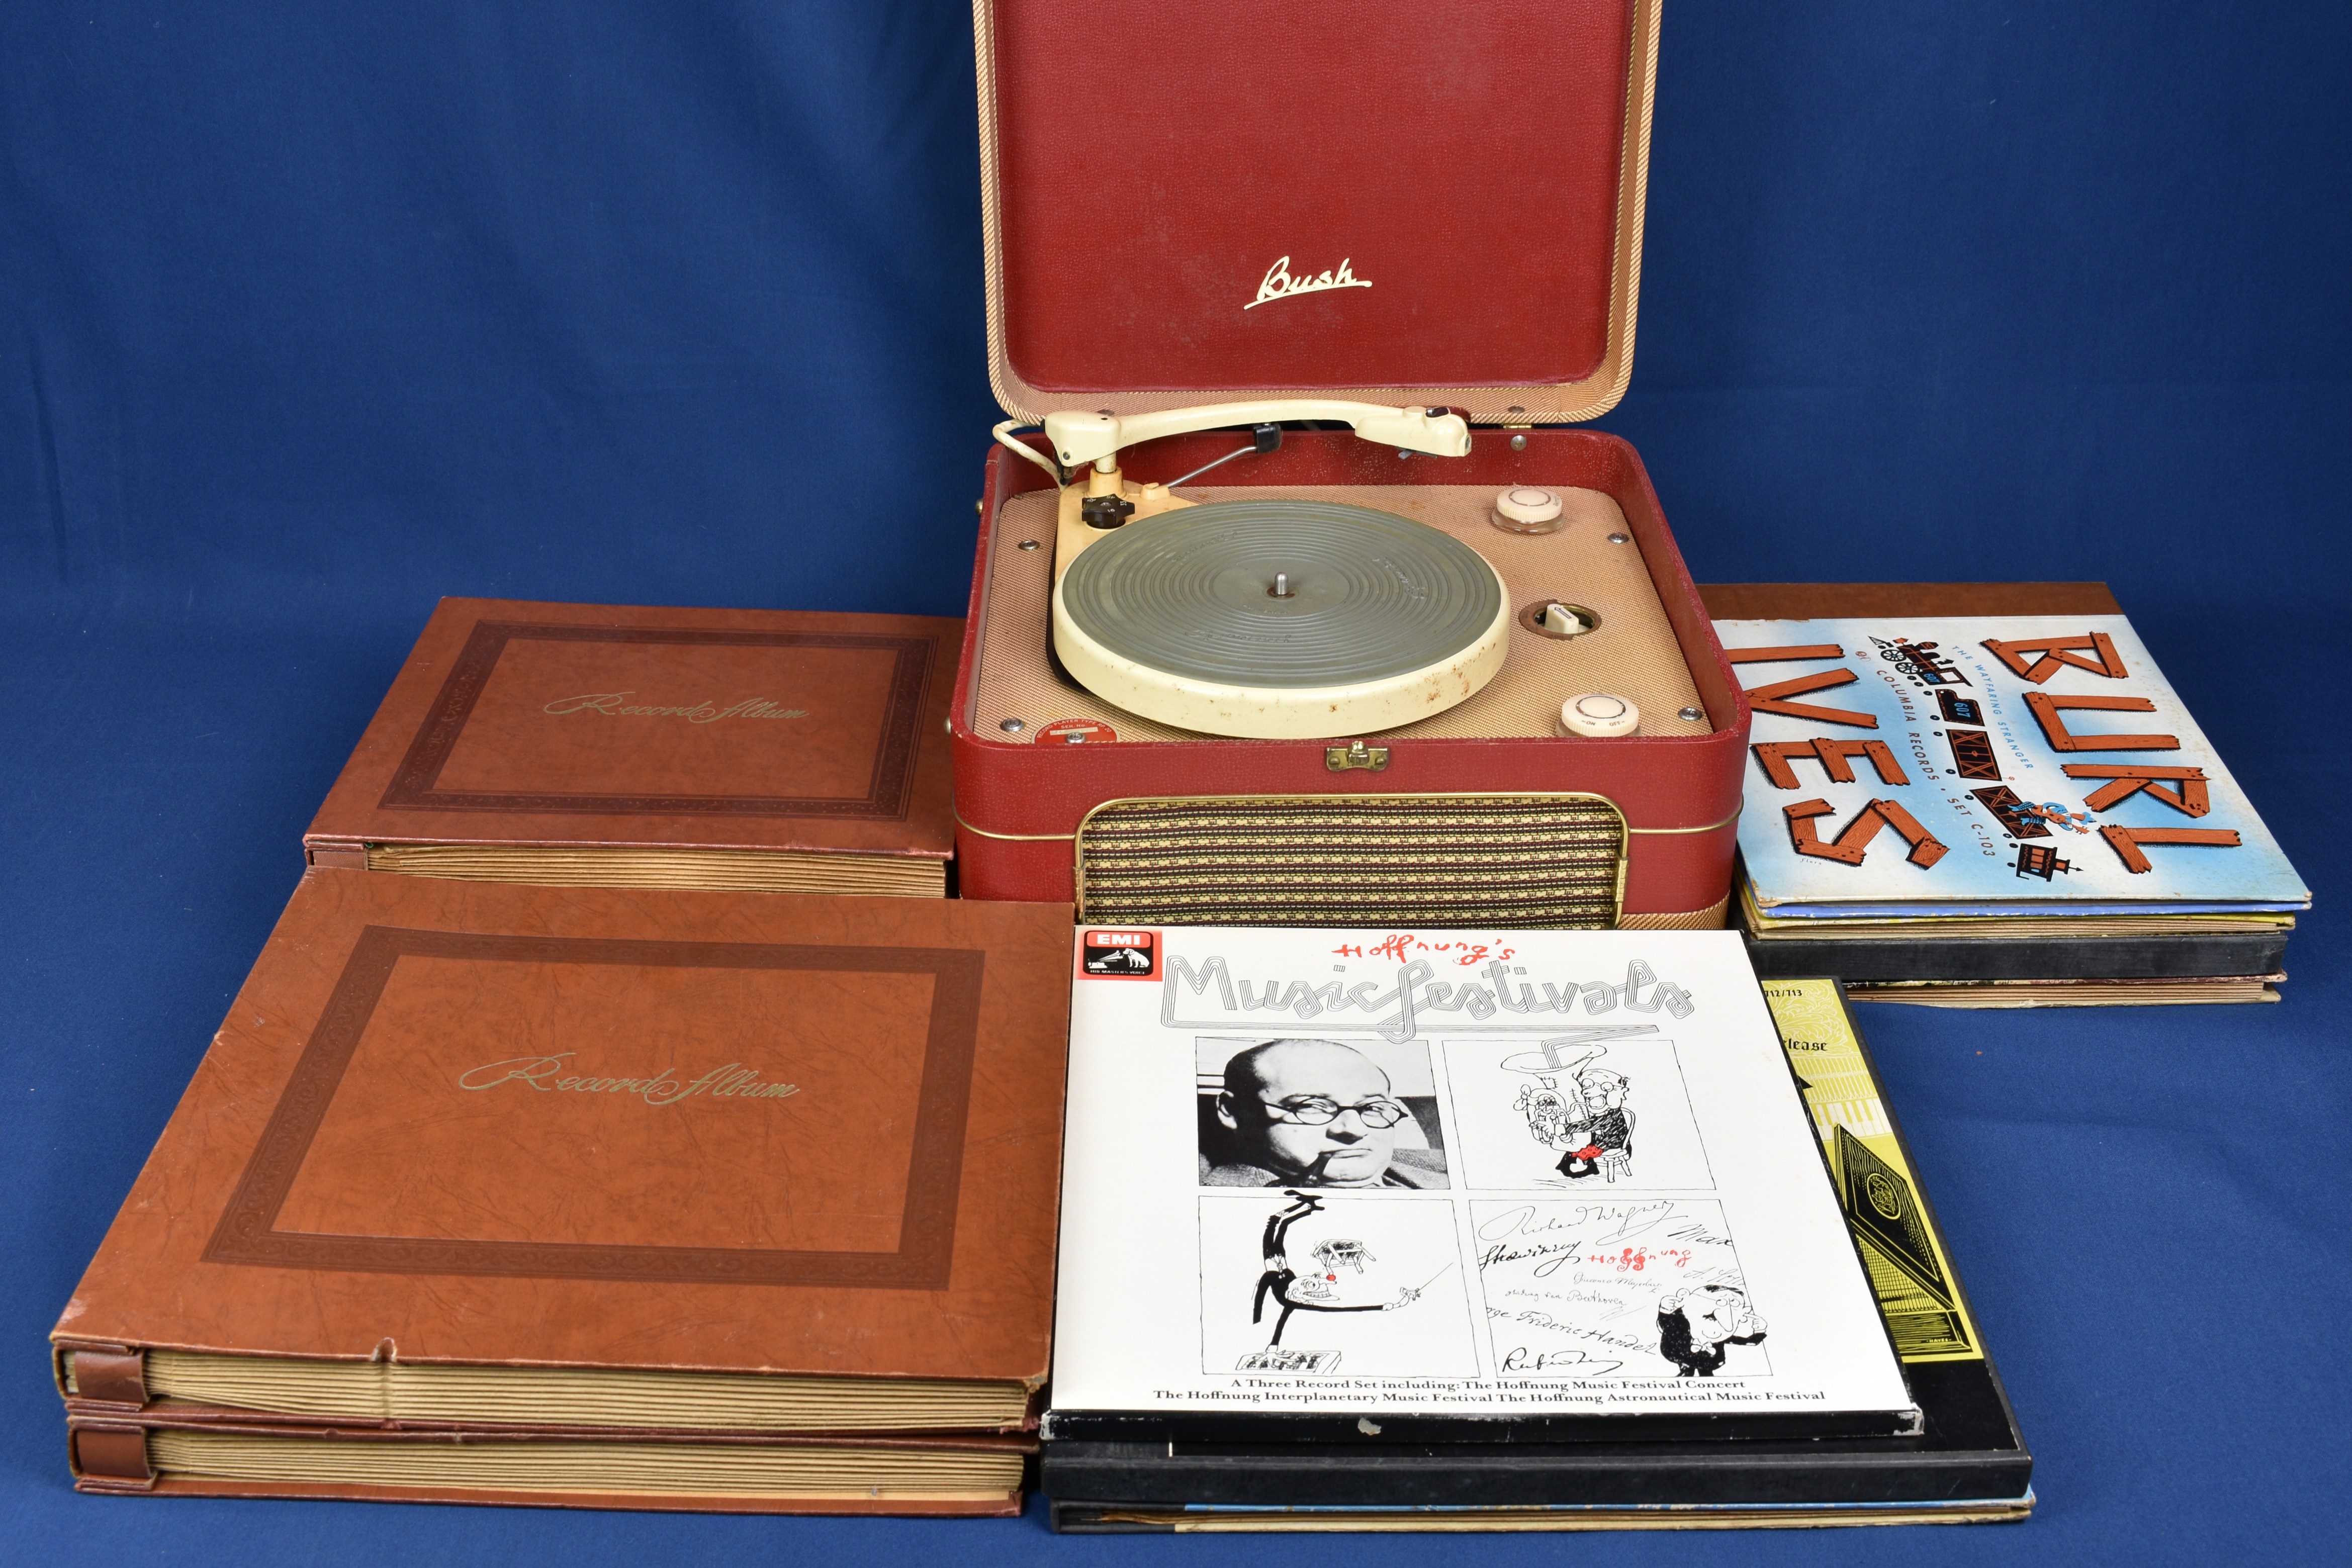 A 1960s Bush RP.20 portable record player with Garrard tonearm and turntable, together with a